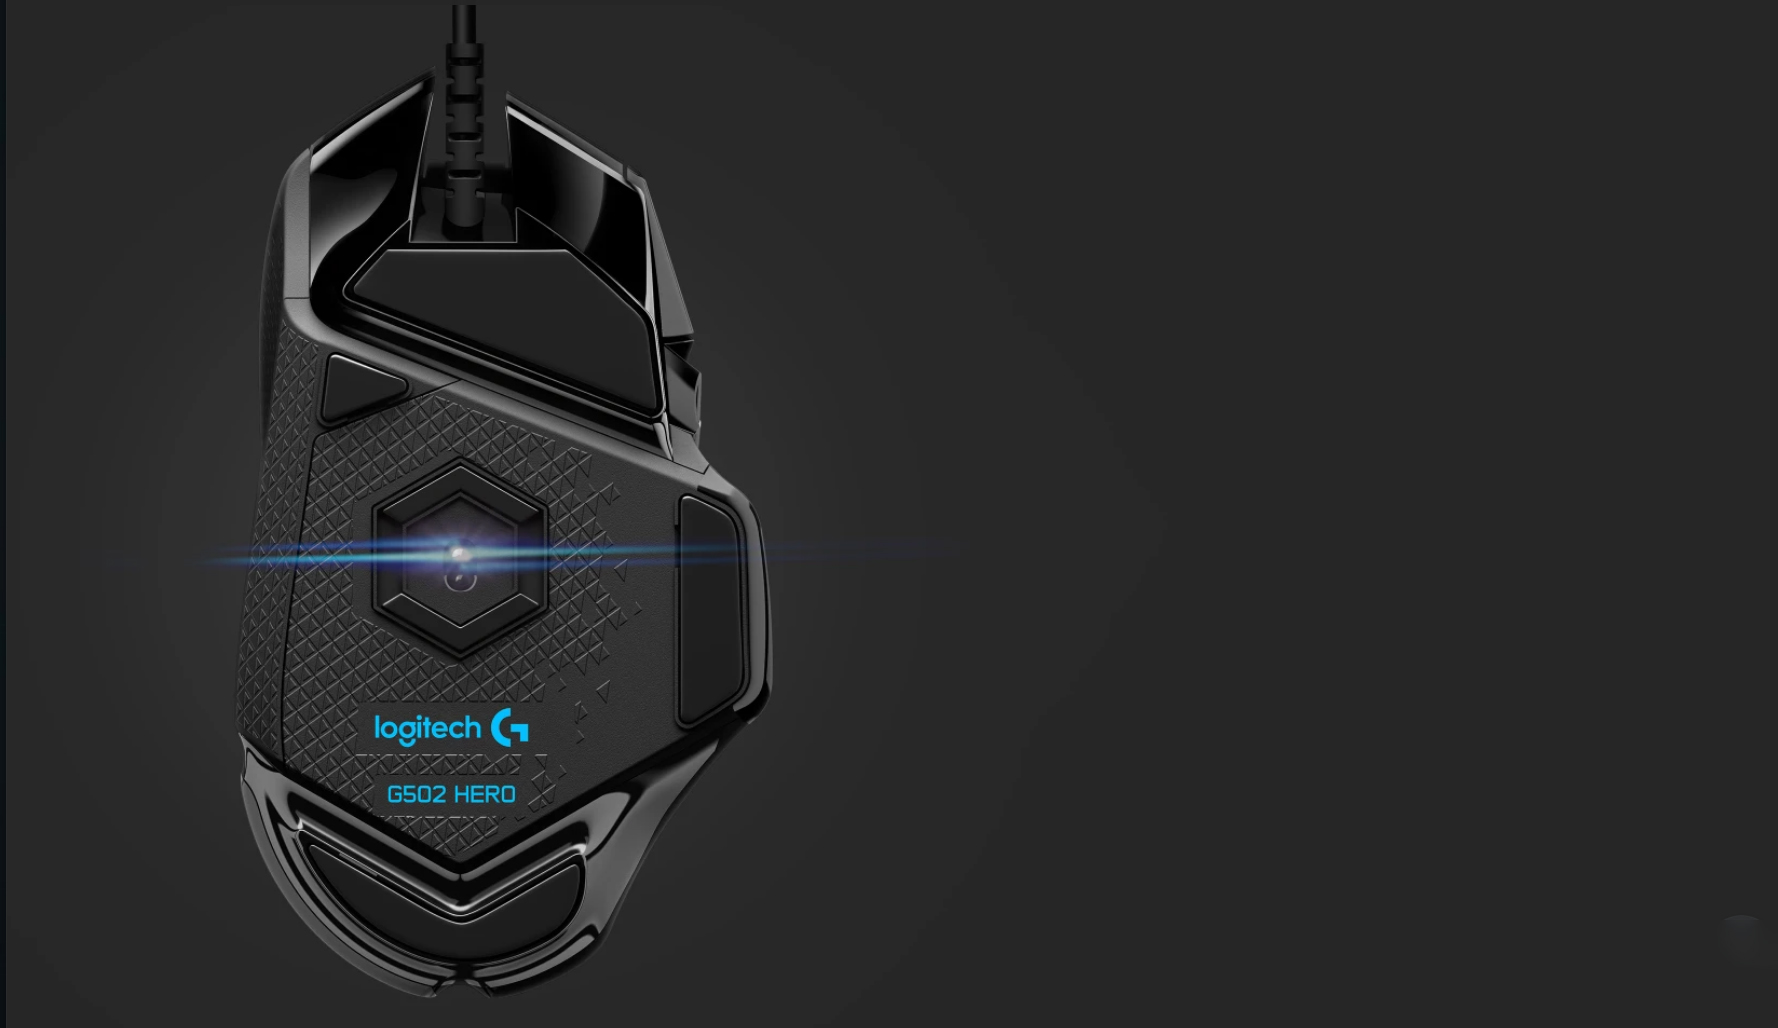  Logitech G502 Hero K/DA High Performance Gaming Mouse - Hero  25K Sensor, 16.8 Million Color LIGHTSYNC RGB, 11 Programmable Buttons,  On-Board Memory - Official League of Legends KDA Gaming Gear : Video Games